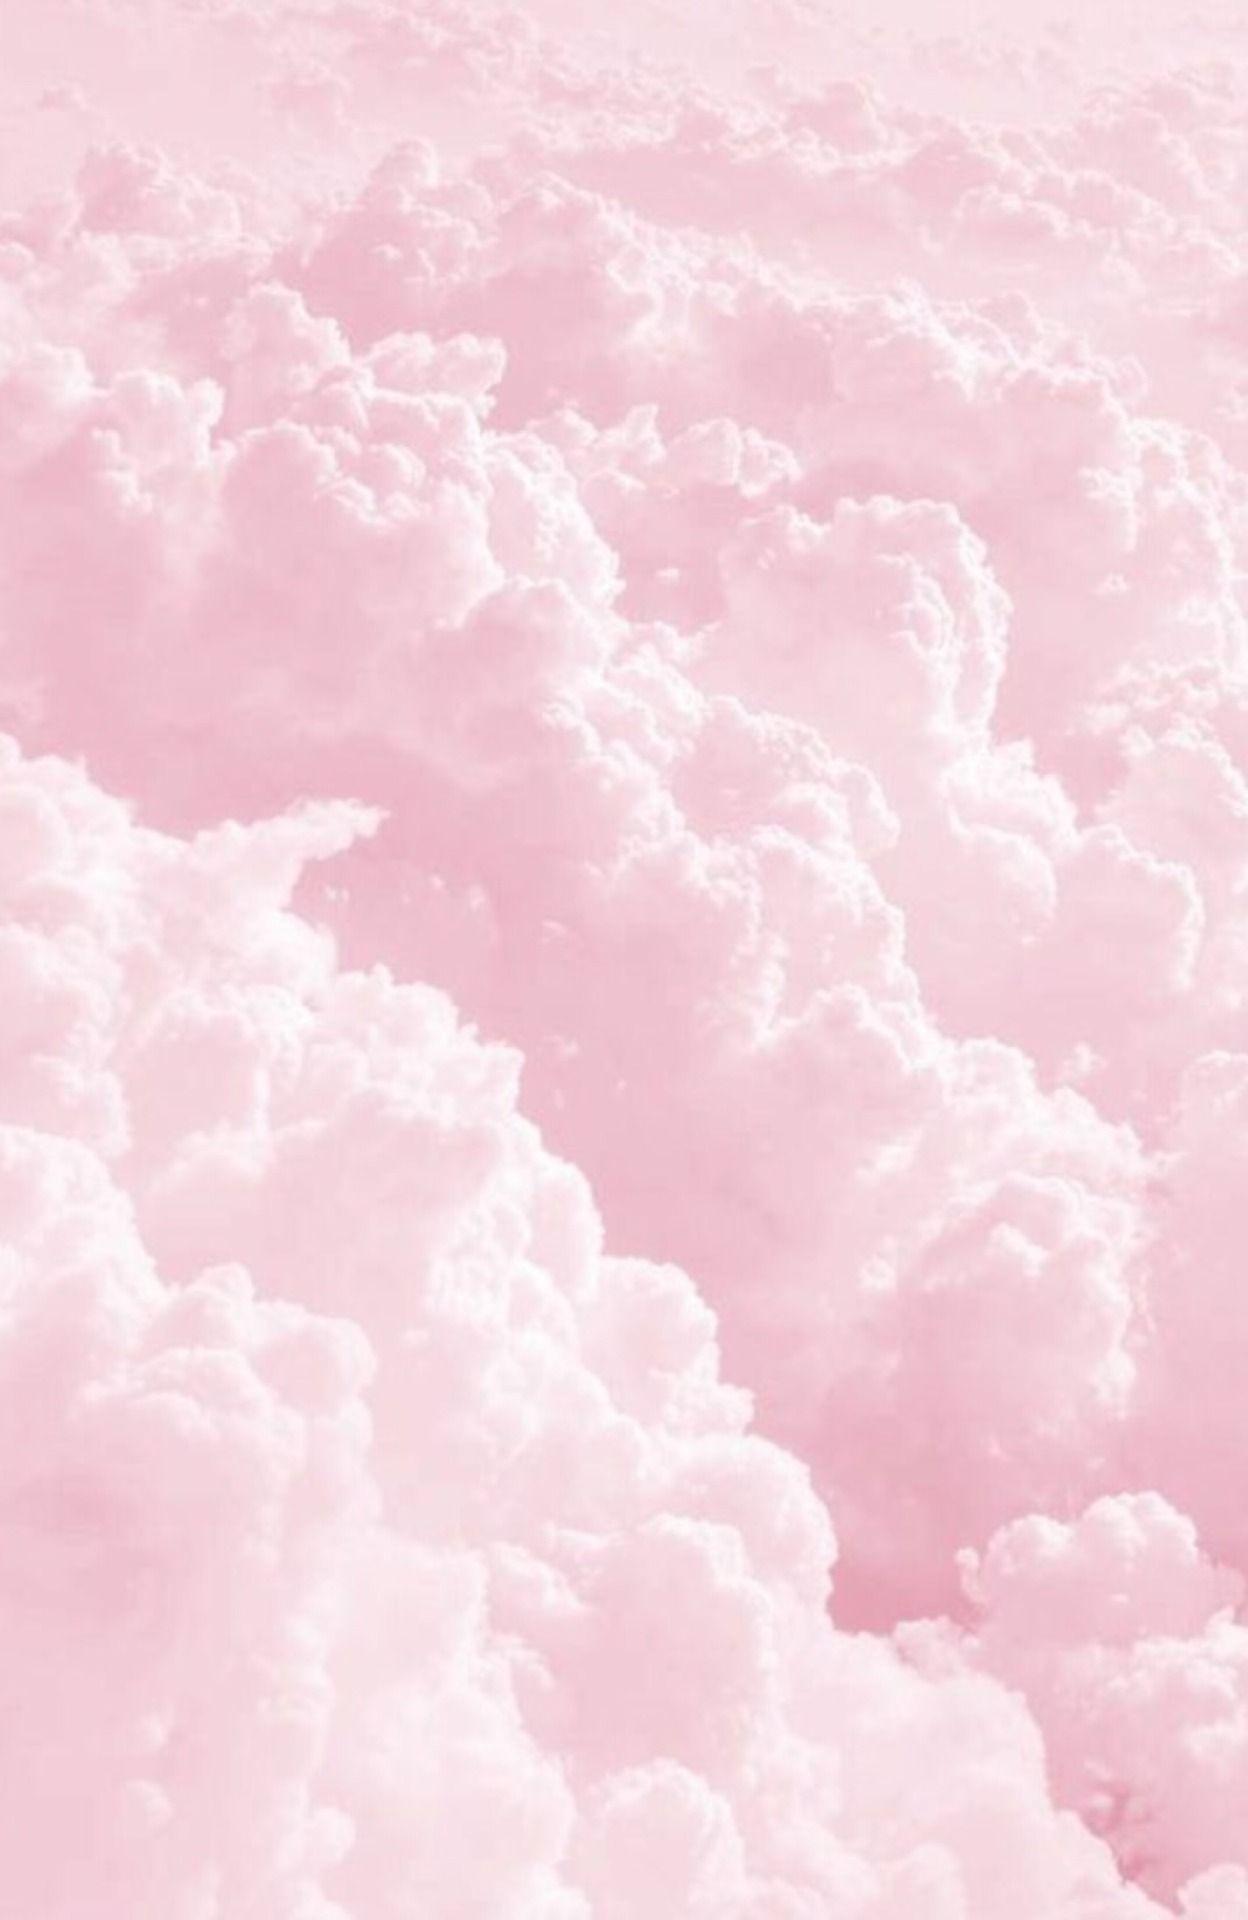 Aesthetic Pink Background, Best Background Image, HD Wallpaper